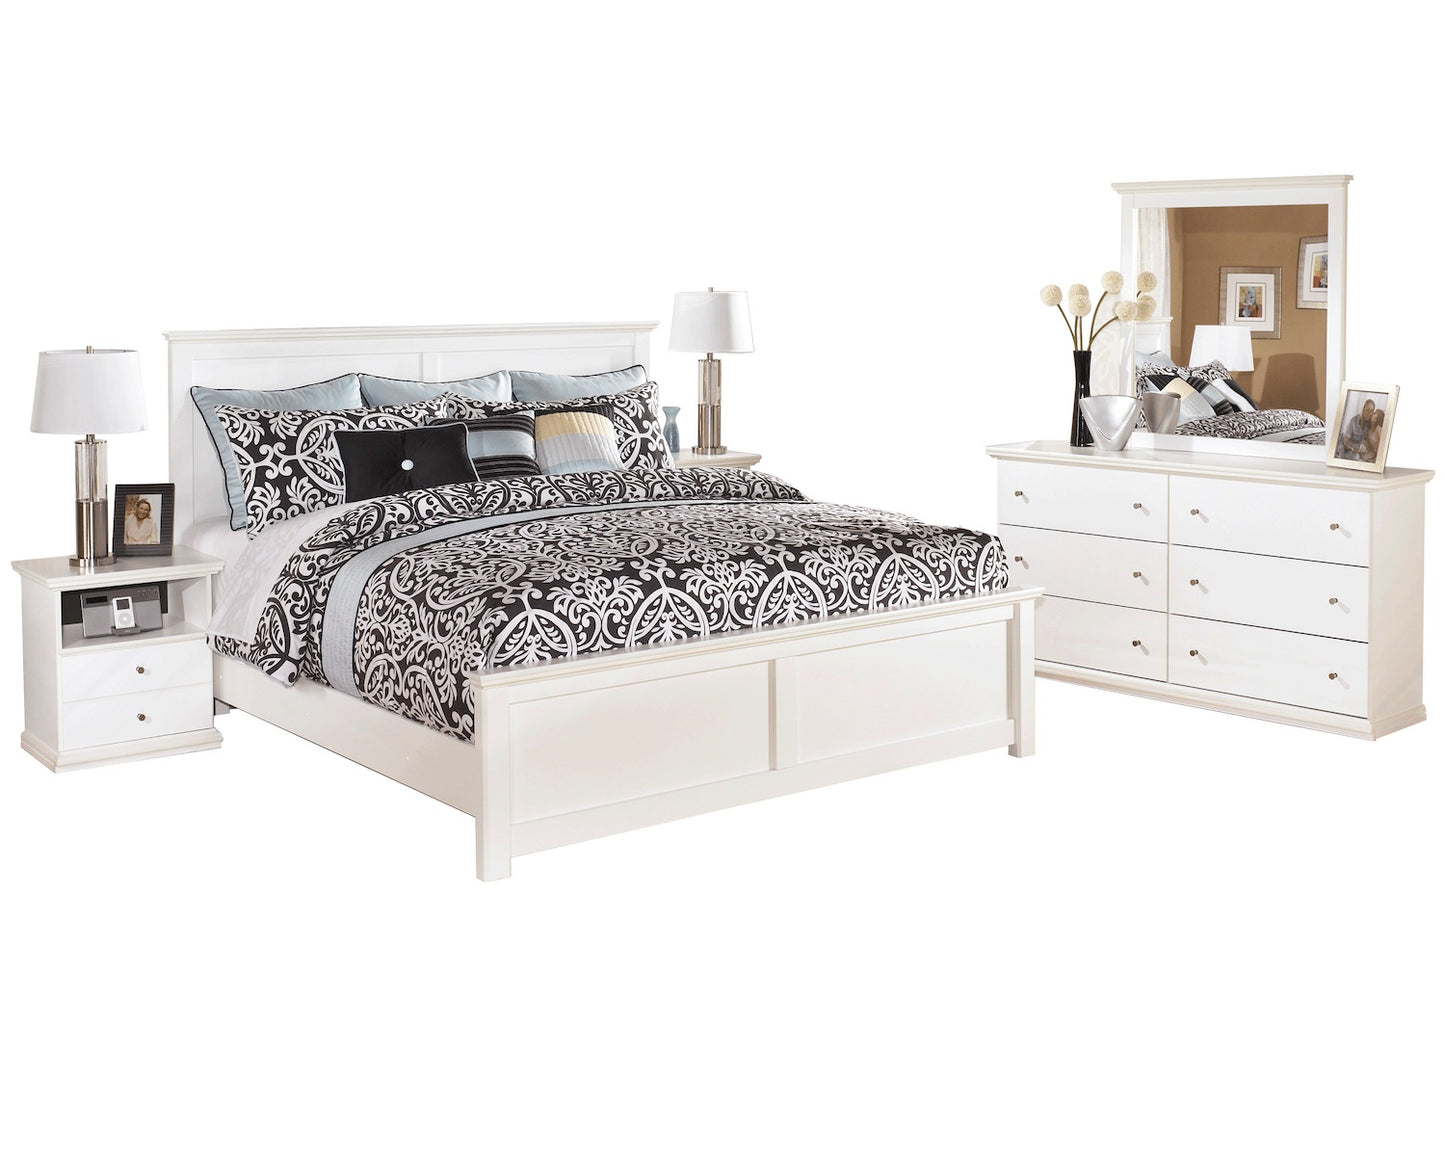 Ashley Bostwick Shoals 5 PC Queen Panel Bedroom Set with two Nightstands in White - The Furniture Space.